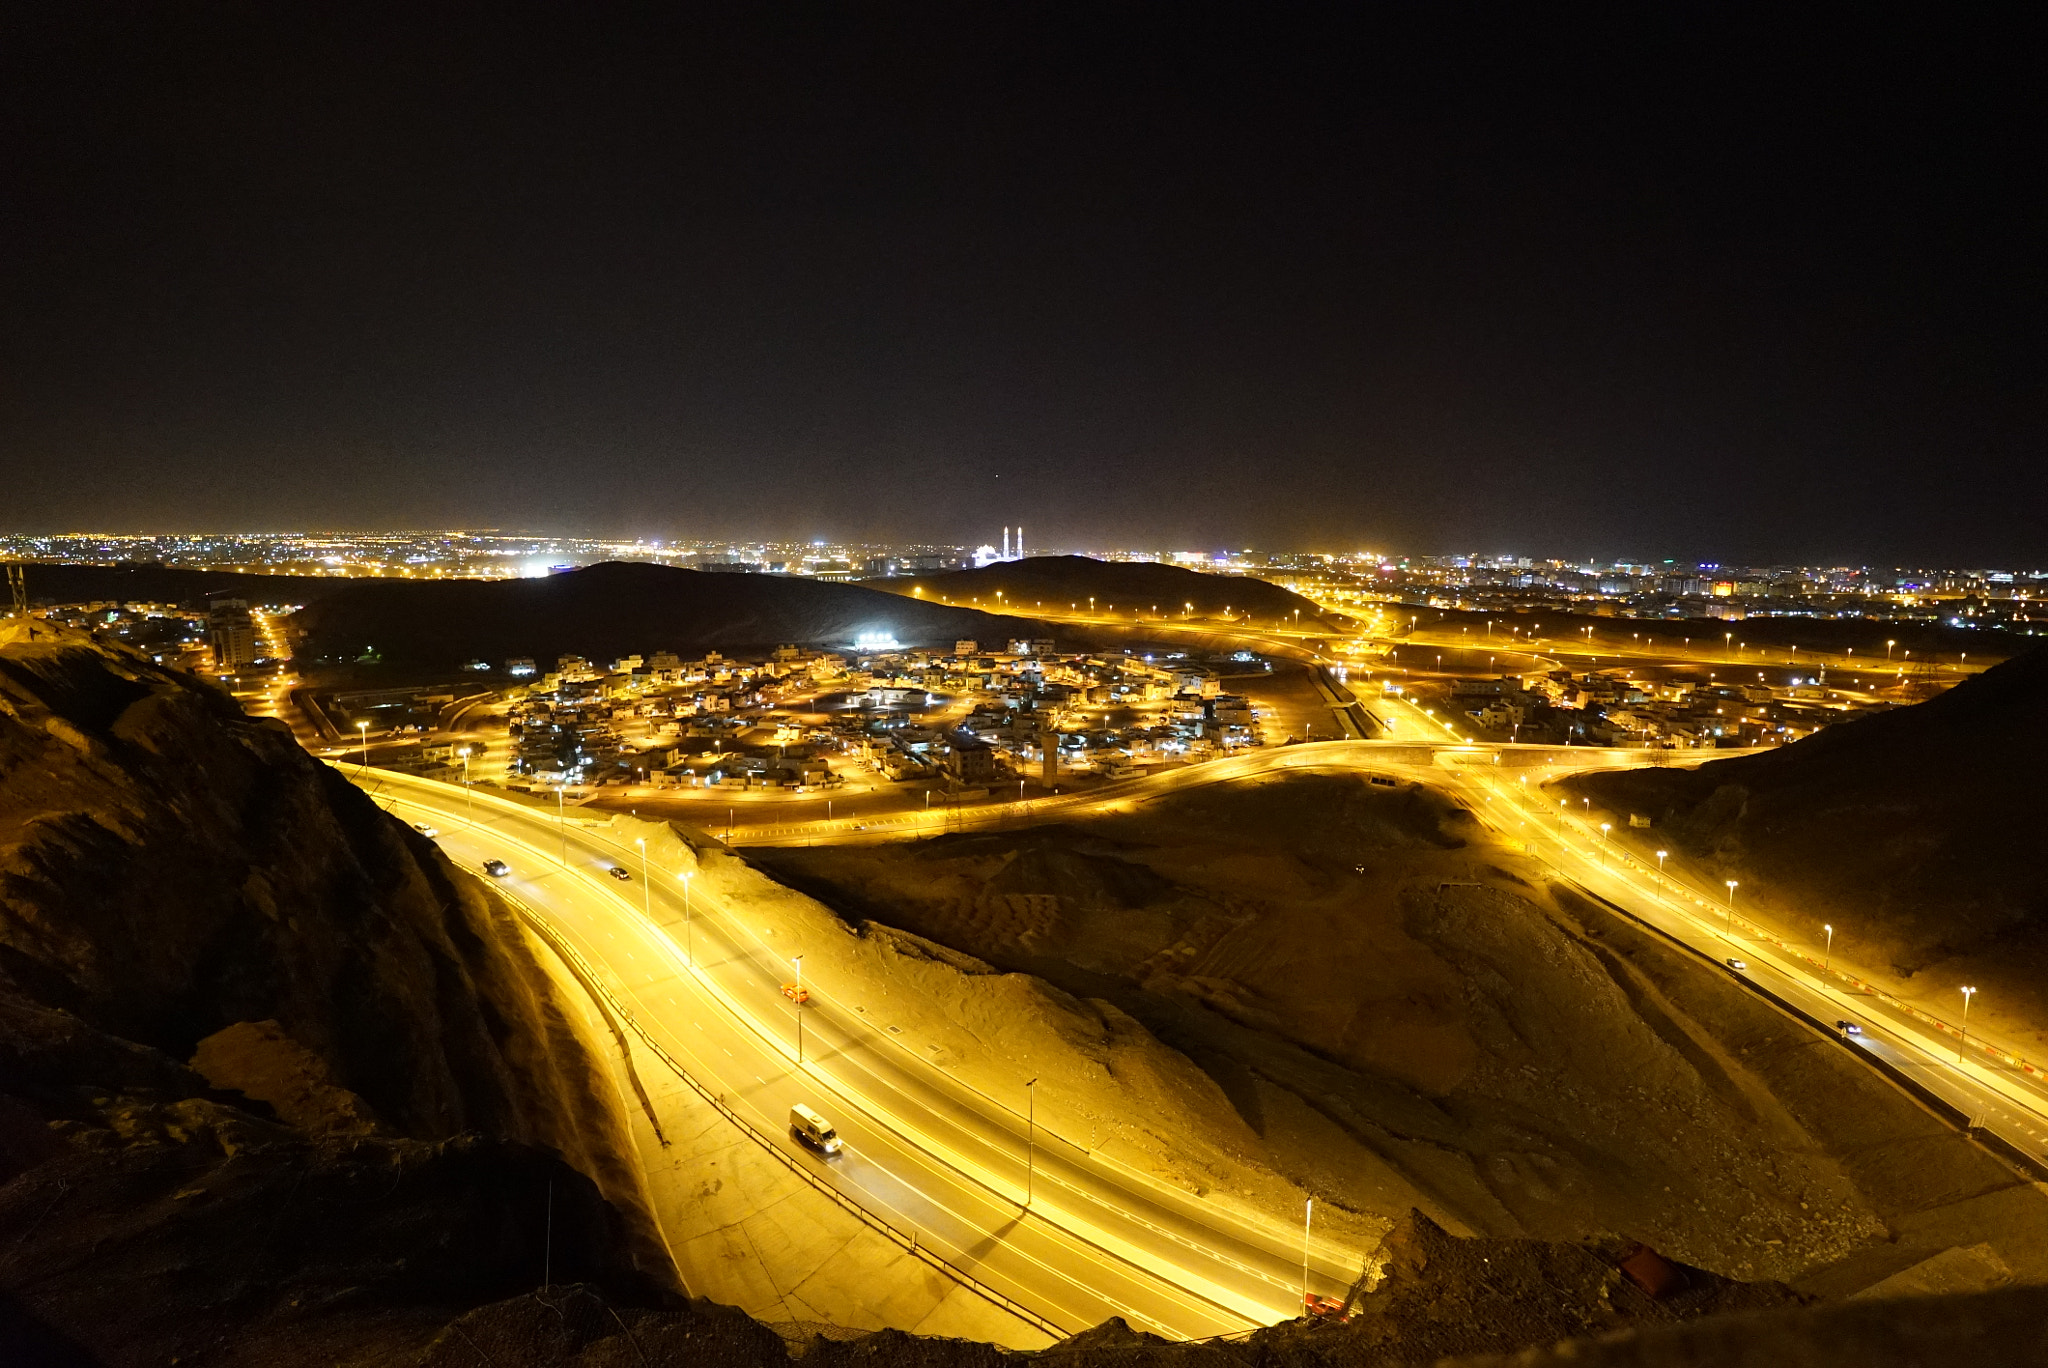 ZEISS Batis 18mm F2.8 sample photo. A #brilliant #muscat #oman #cityscape capture from bawsher-amrat #mountain road. photography